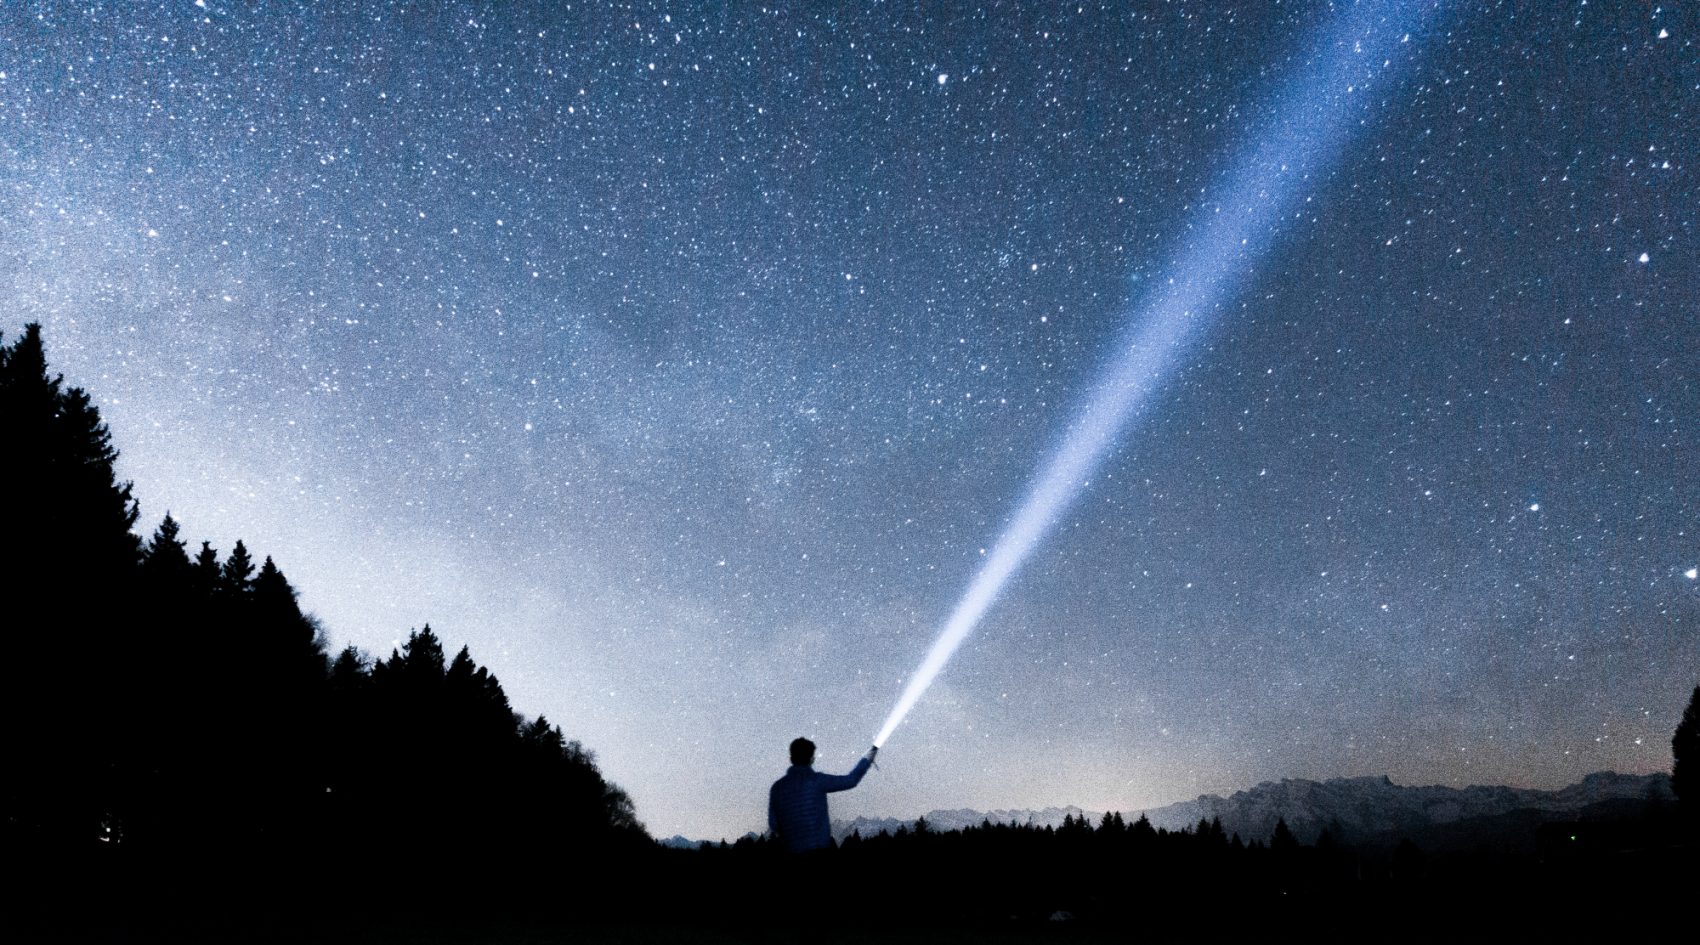 He doesn't really put the stars in the night sky, but, Bill Eville writes, while his children are far from home, he is still trying so hard to be their guiding light. (Martin Sattler/Unsplash)